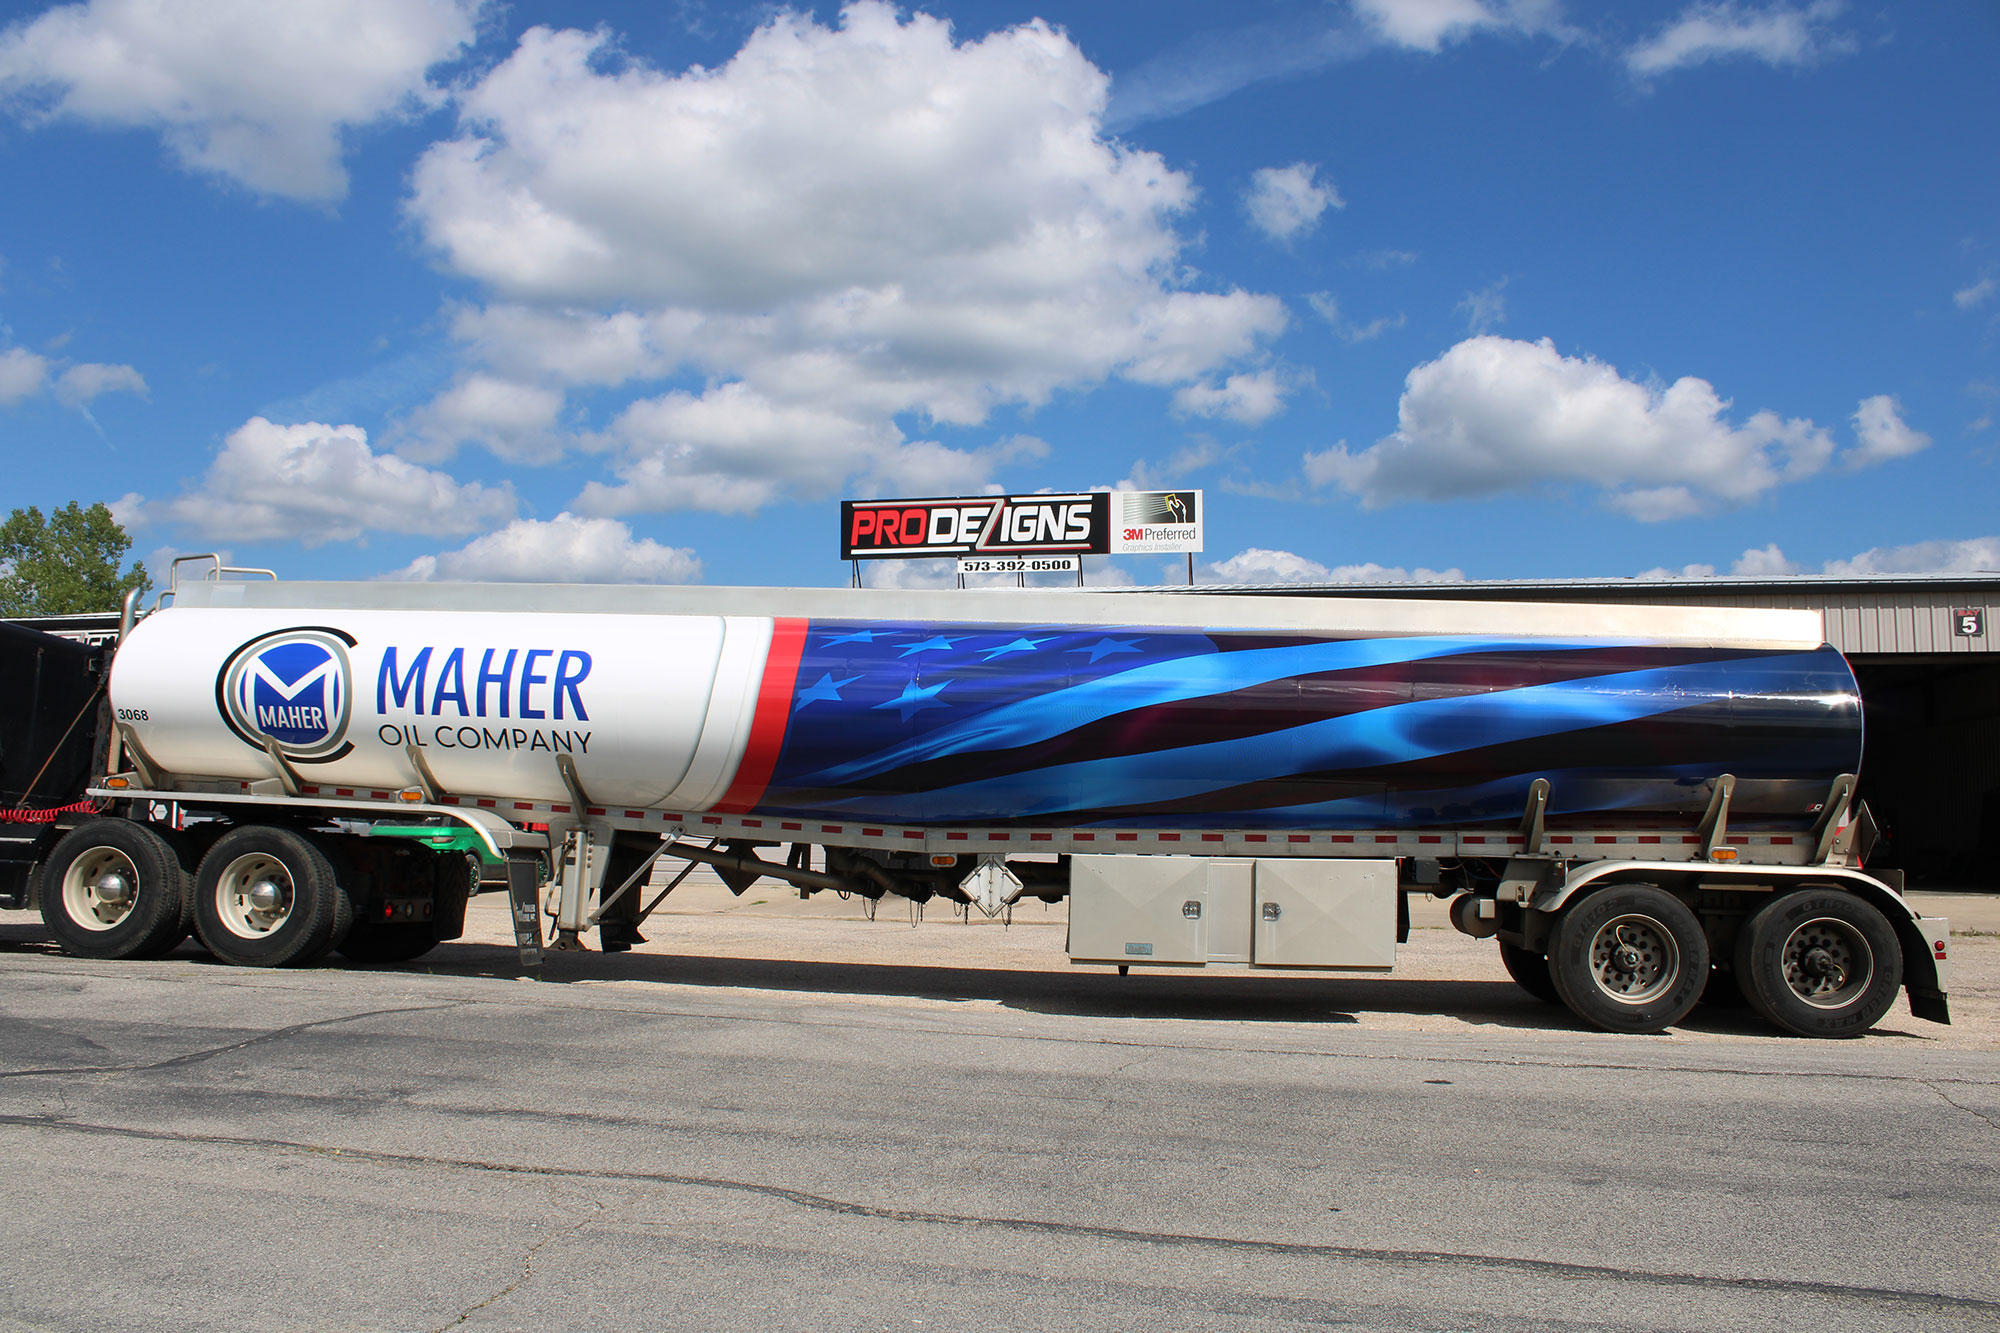 Maher Oil Company Tanker Vinyl Wrapping Store Fronts Windows Outdoor Pro Dezigns Jeff City Mo